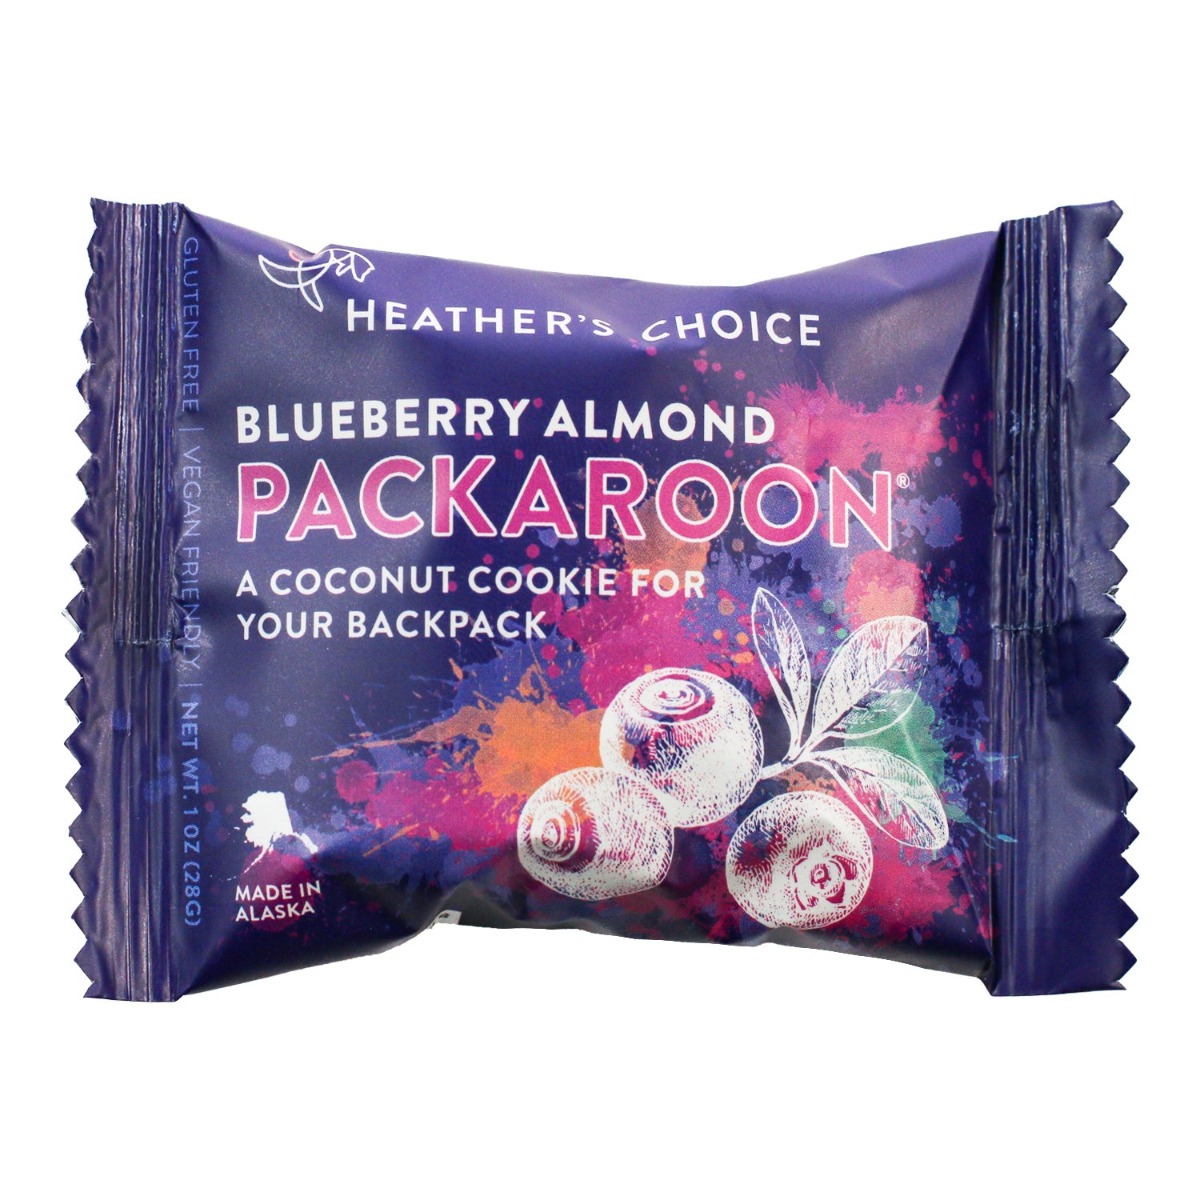 Blueberry Almond Packaroons(R) - Single Pack (Heather's Choice)